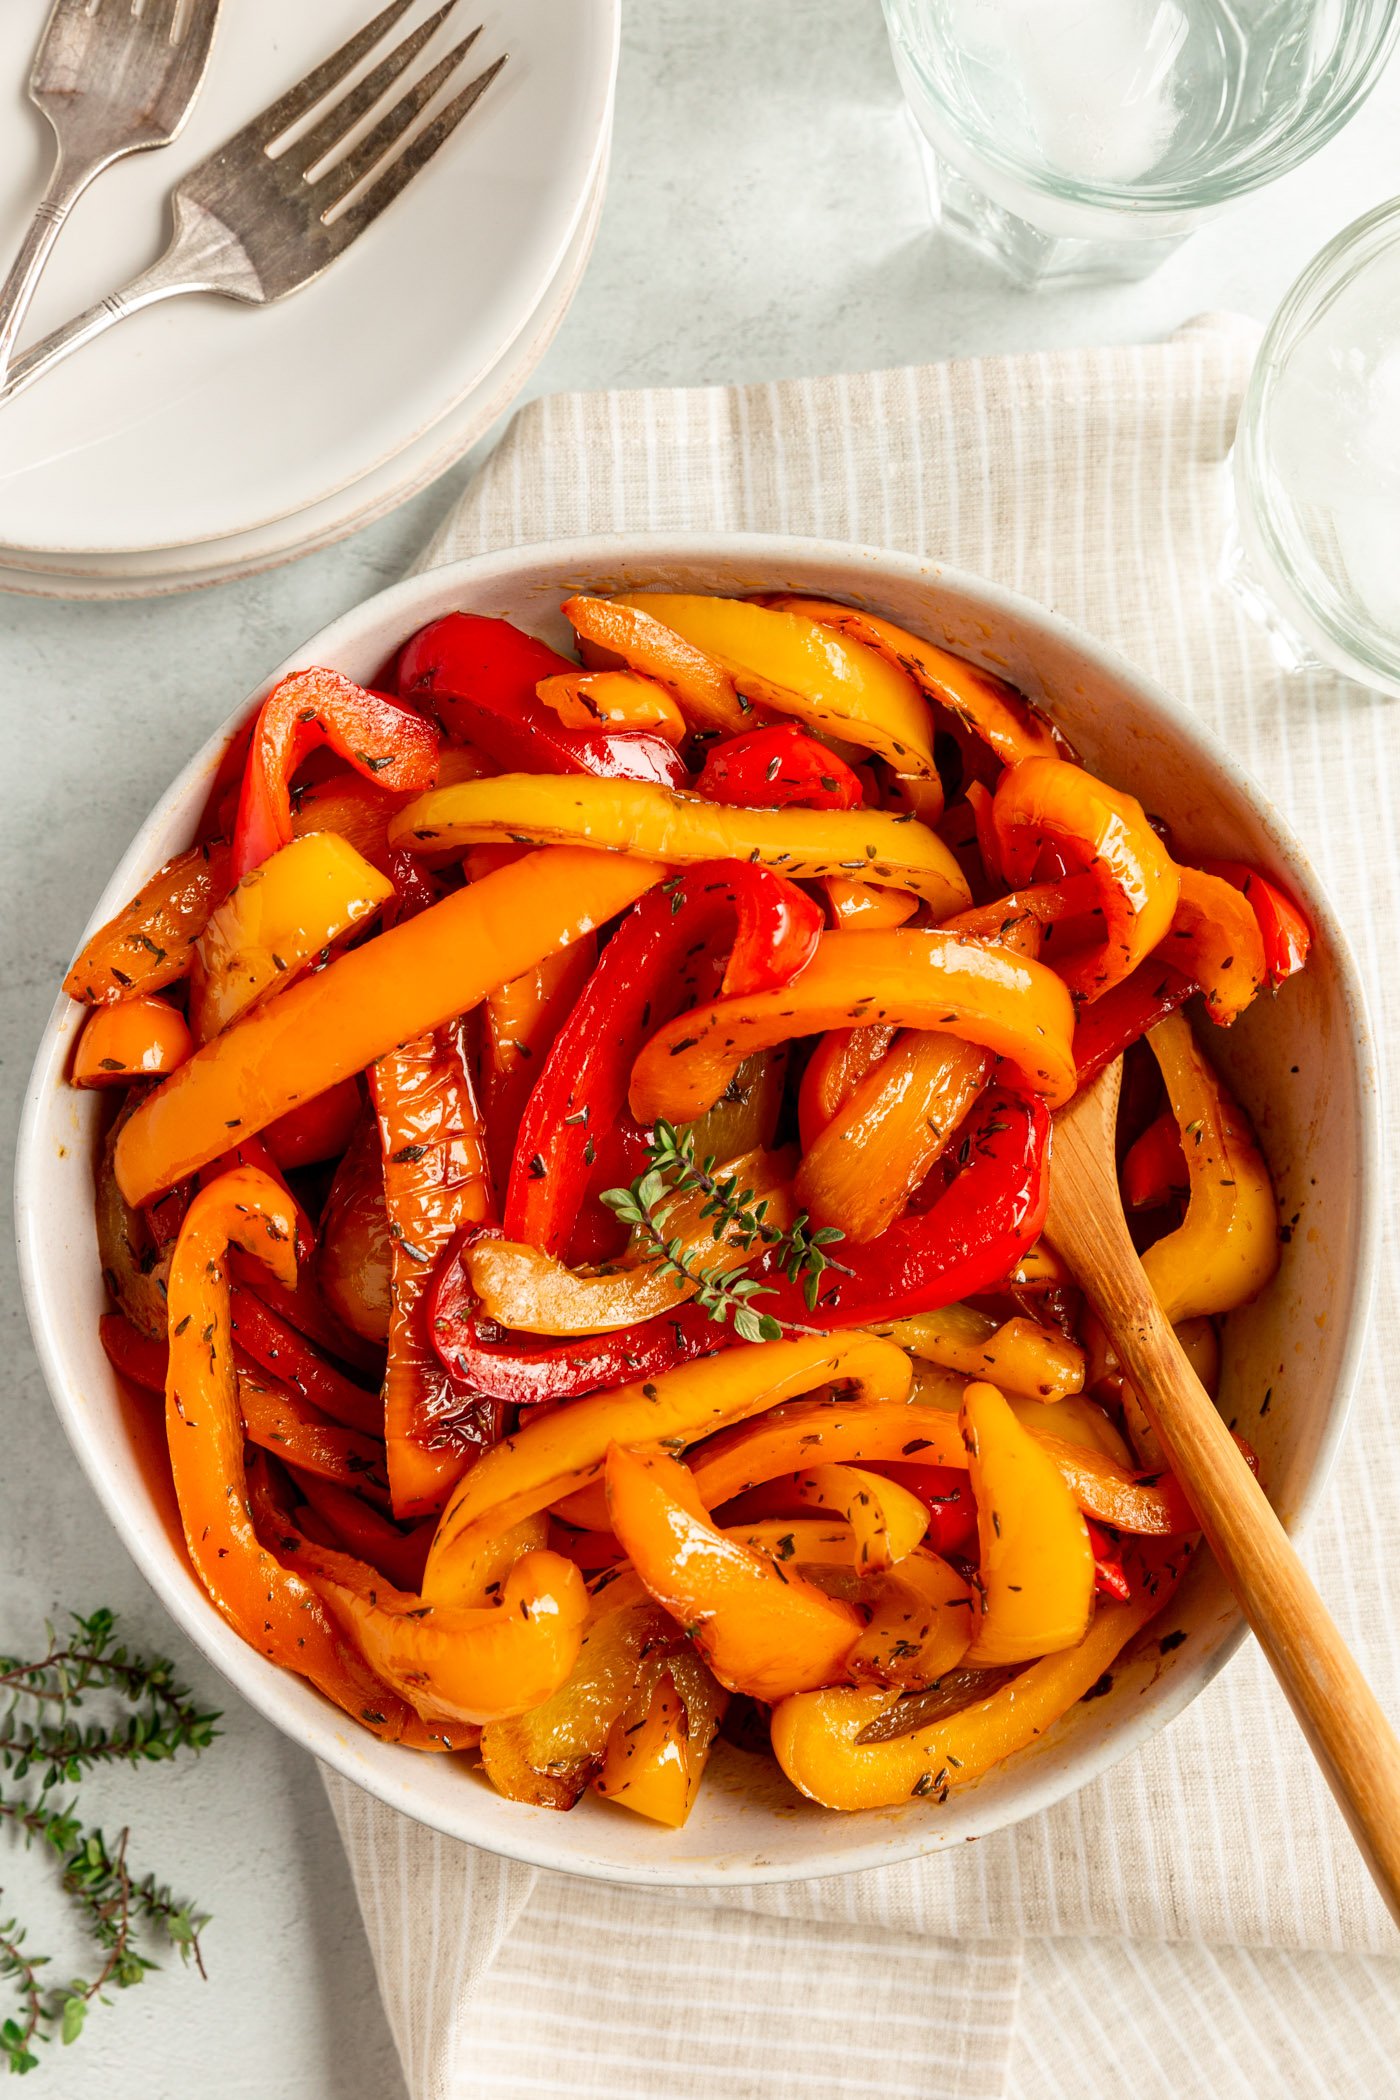 Sauteed bell peppers in a bowl with a wooden serving spoon. They are topped with fresh thyme. There is a striped tan napkin under the bowl, fresh thyme next to it, and glassed of water and plates with forks beside it.